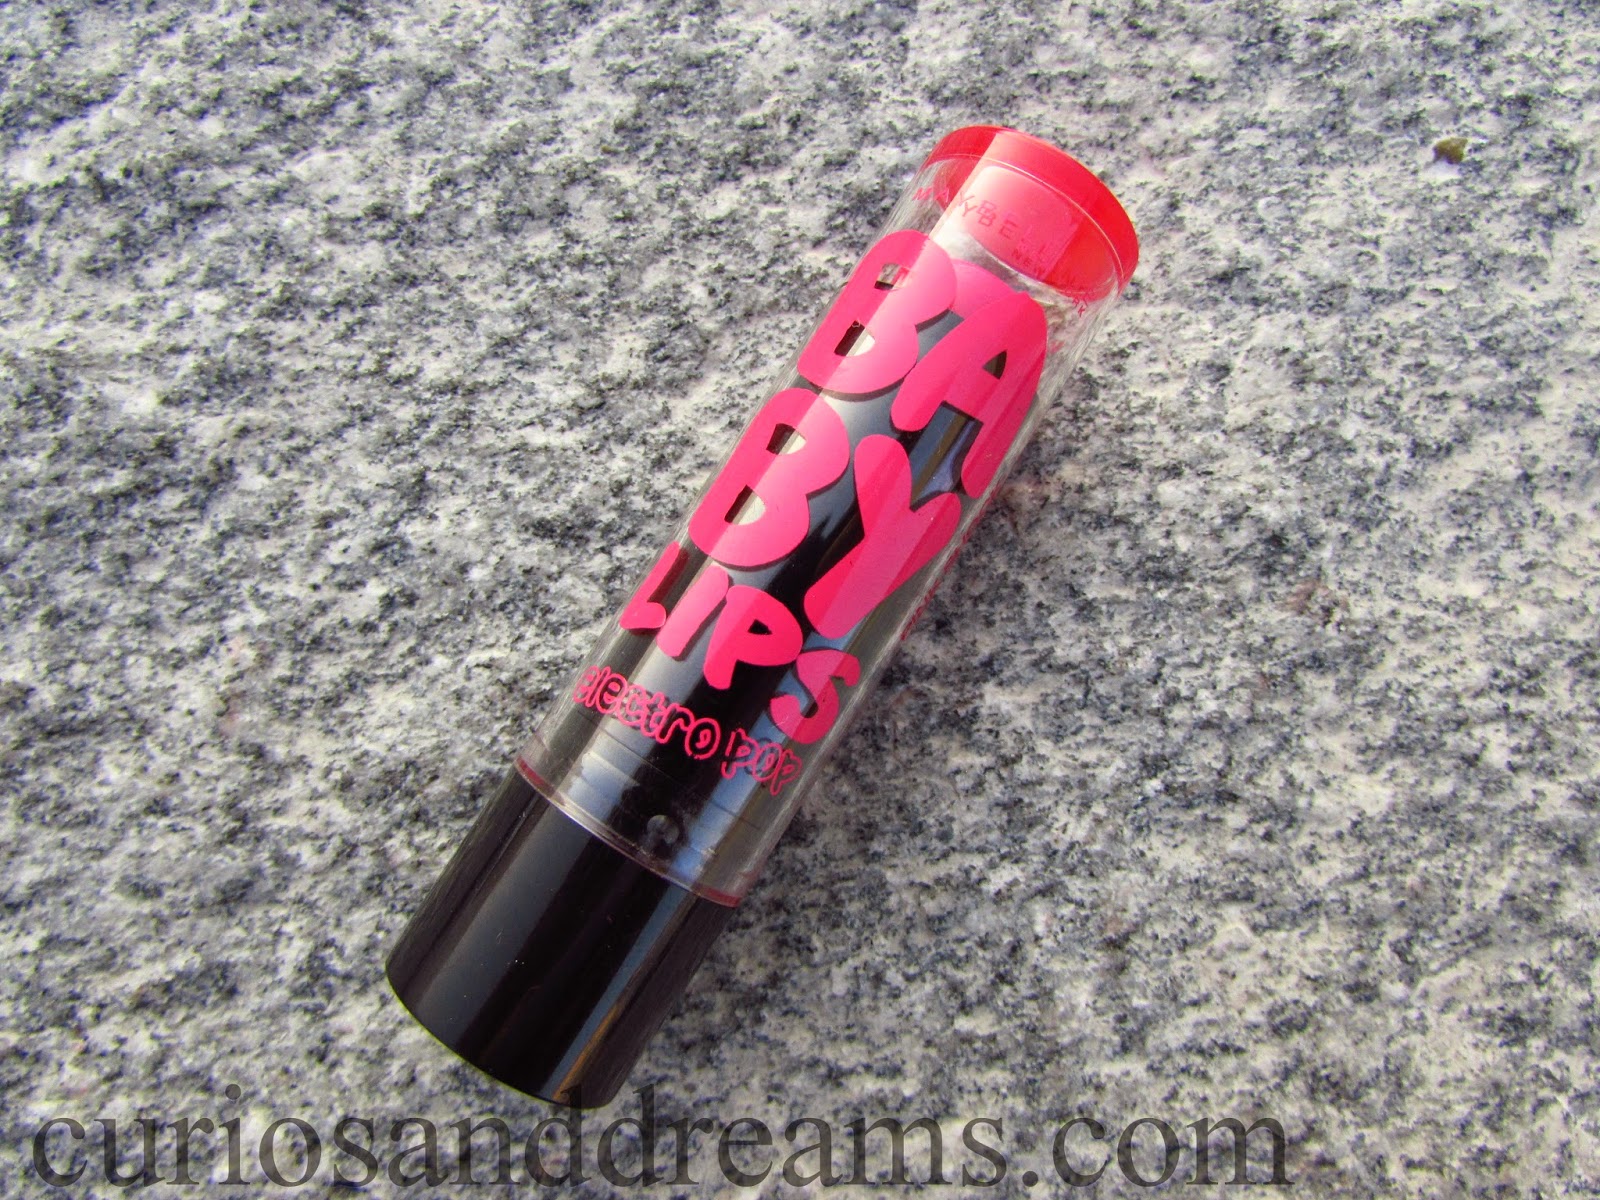 Maybelline Baby Lips Electro Pop Lip Balm Pink Shock Review, Maybelline Baby Lips Electro Pop Pink Shock Review, Maybelline Pink Shock